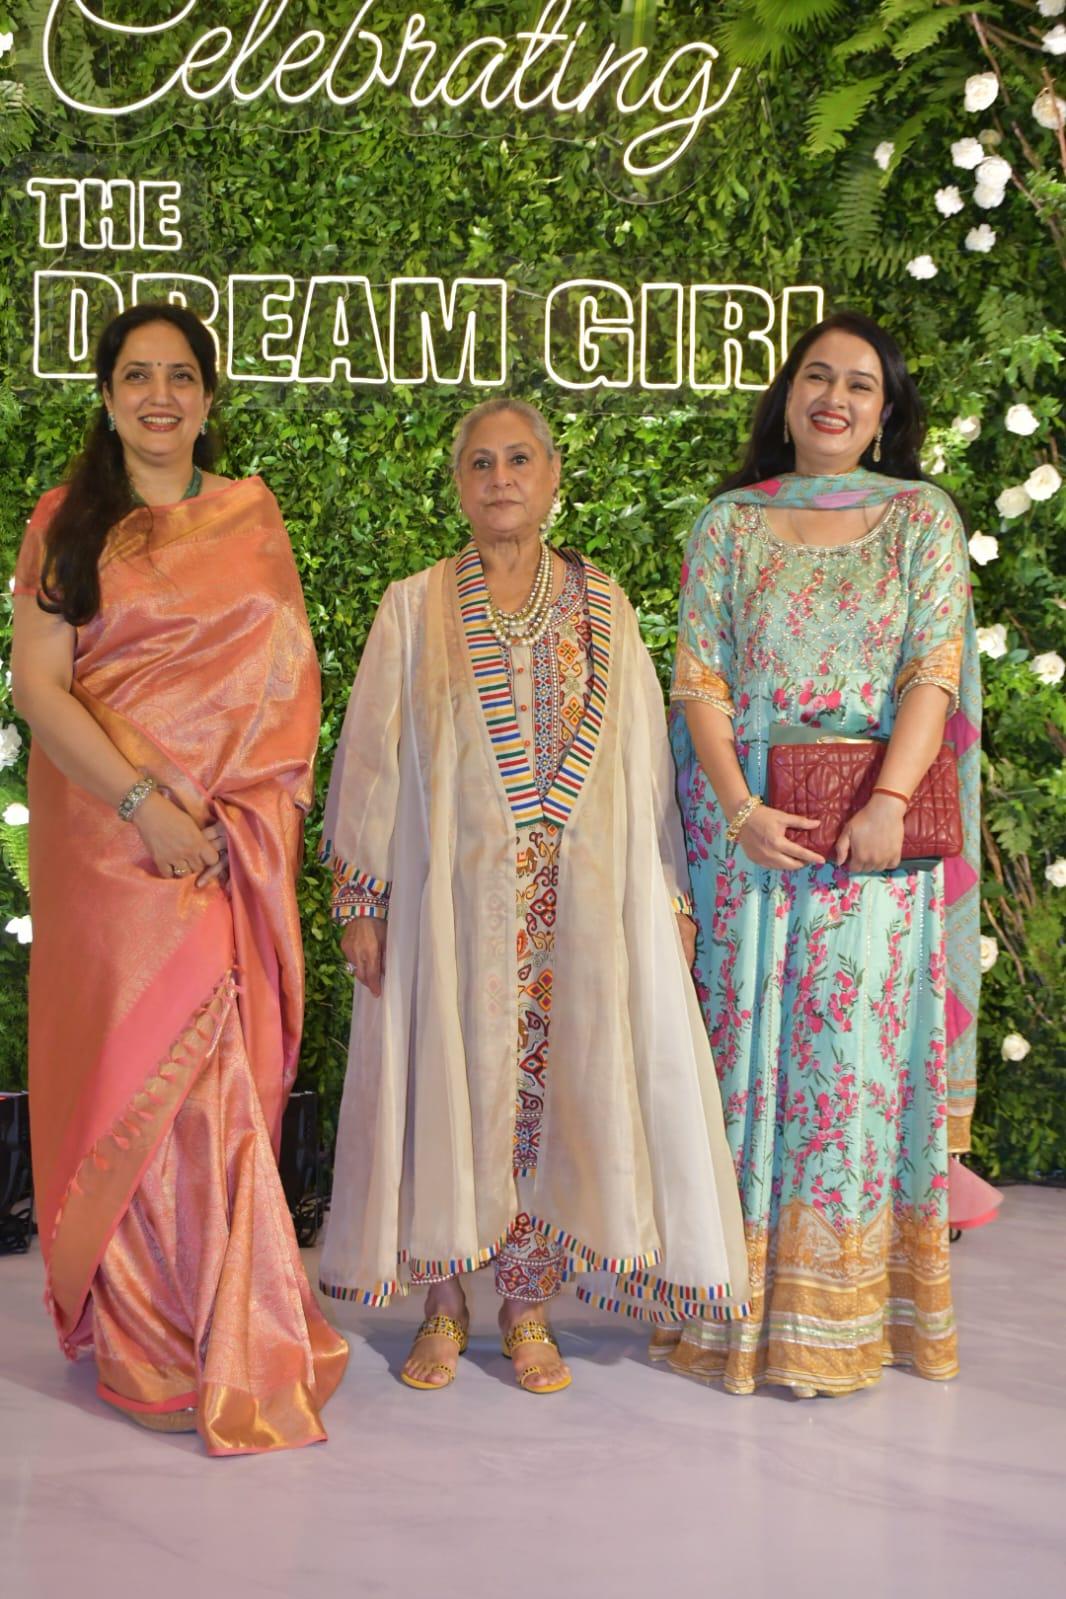 Jaya Bachchan was spotted at the event alongside Padmini Kolhapure